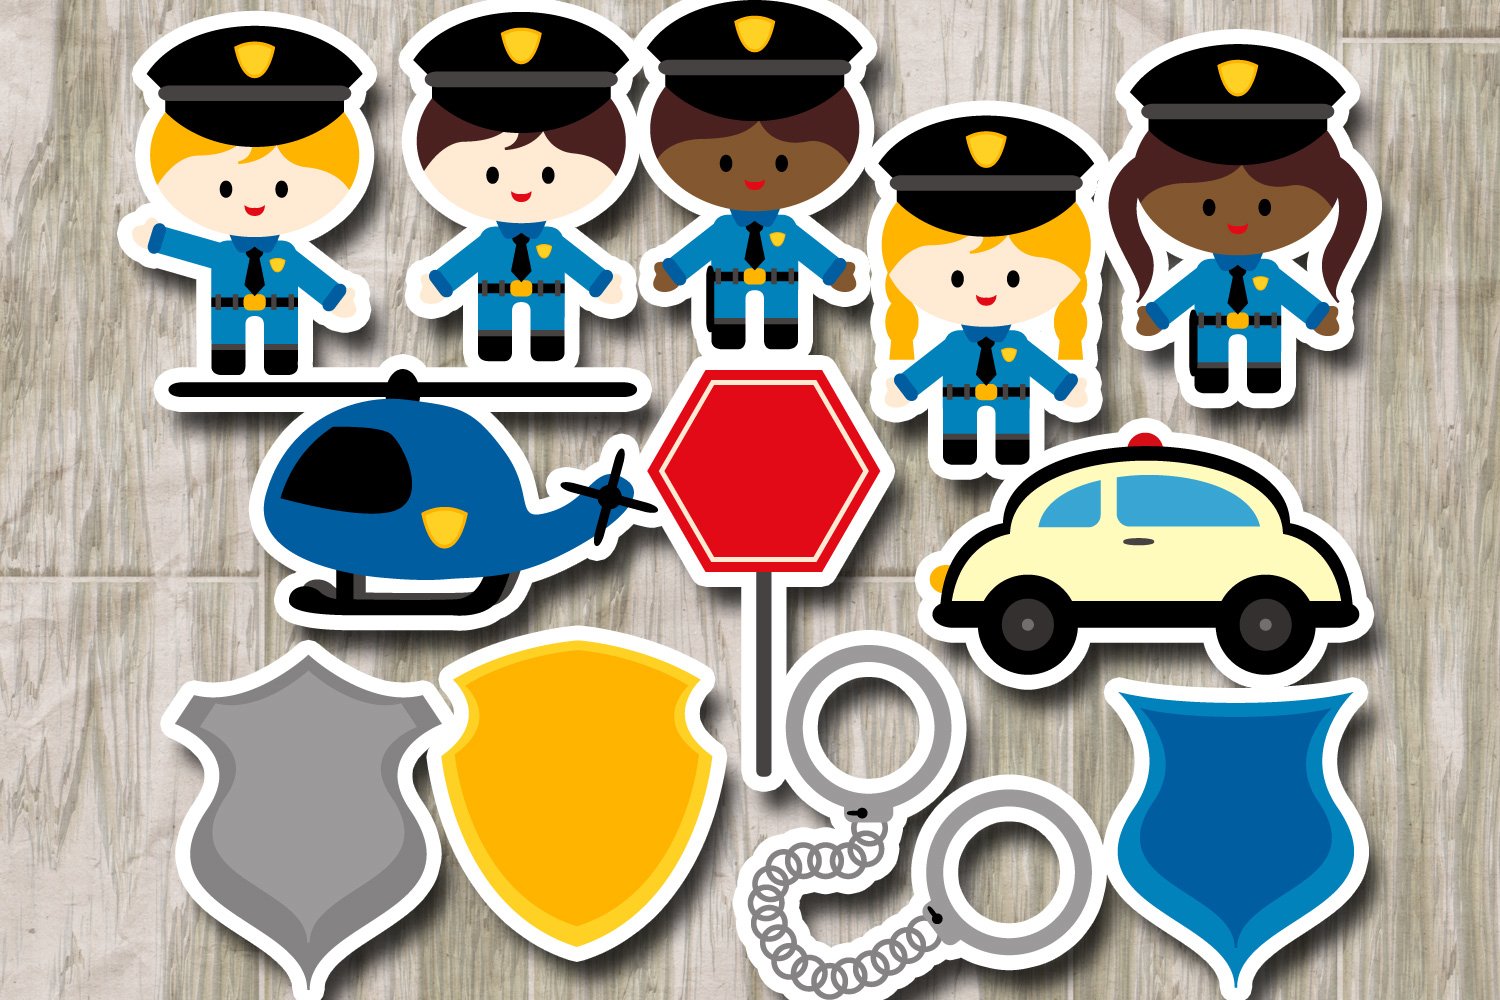 Sticker images - 3 police officers, 2 police women, 4 police badges, helicopter, police car and handcuffs.